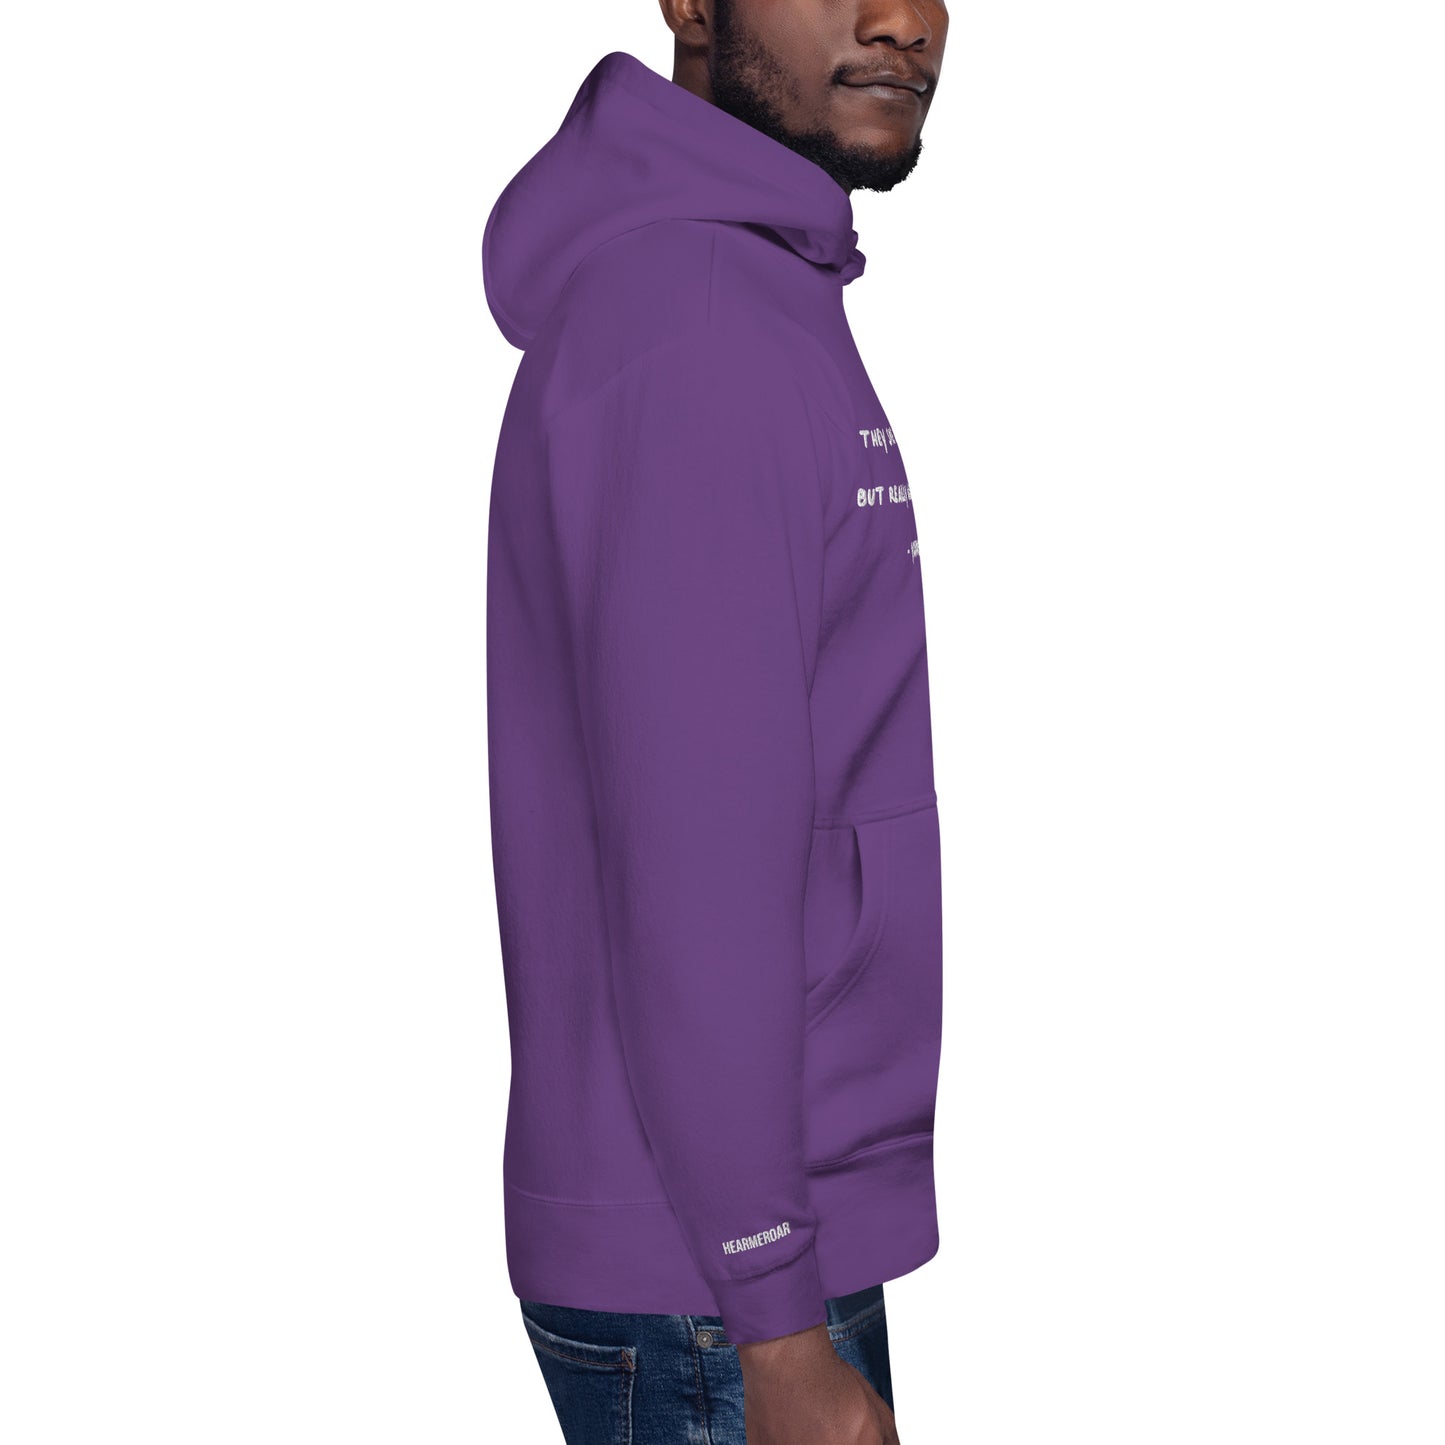 They Smile In Your Face / Rest In Peace Young Dolph Embroidered Unisex Hoodie